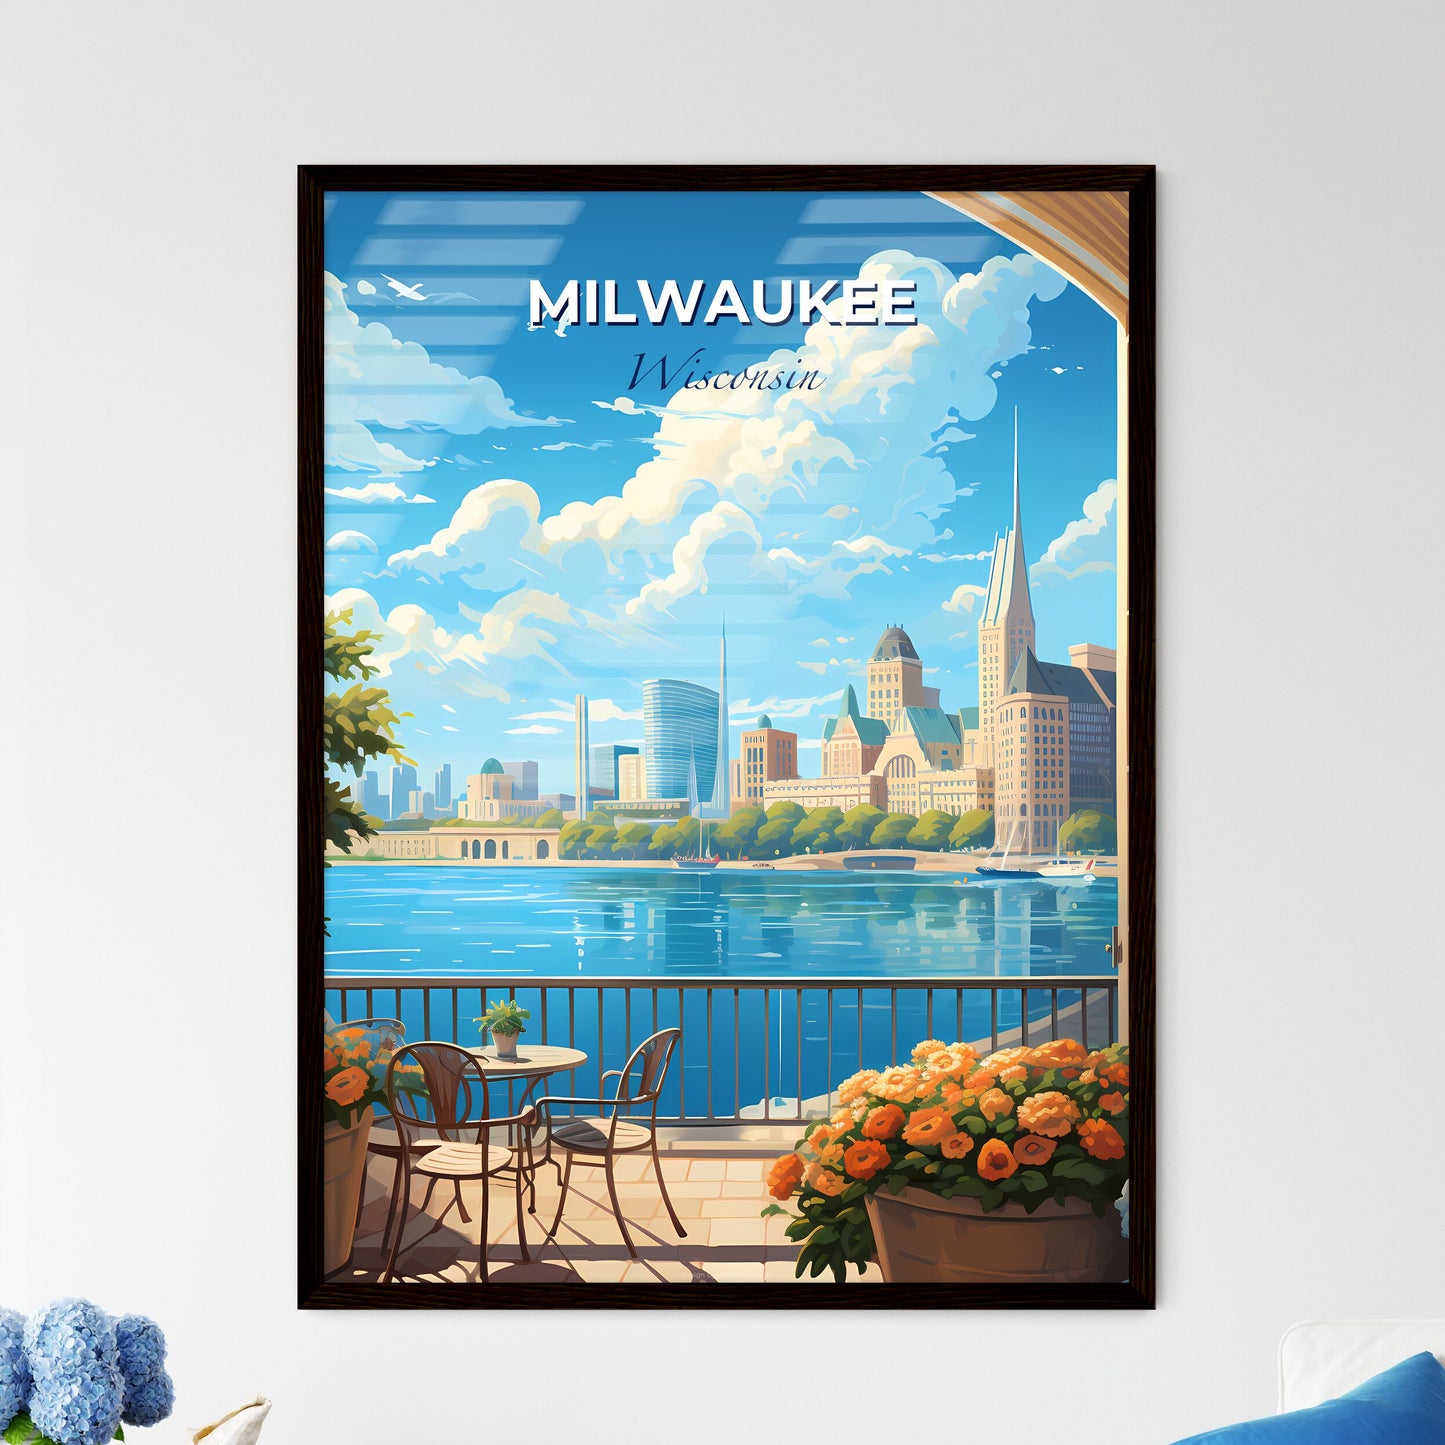 Milwaukee Wisconsin Skyline - A View Of A City From A Balcony - Customizable Travel Gift Default Title